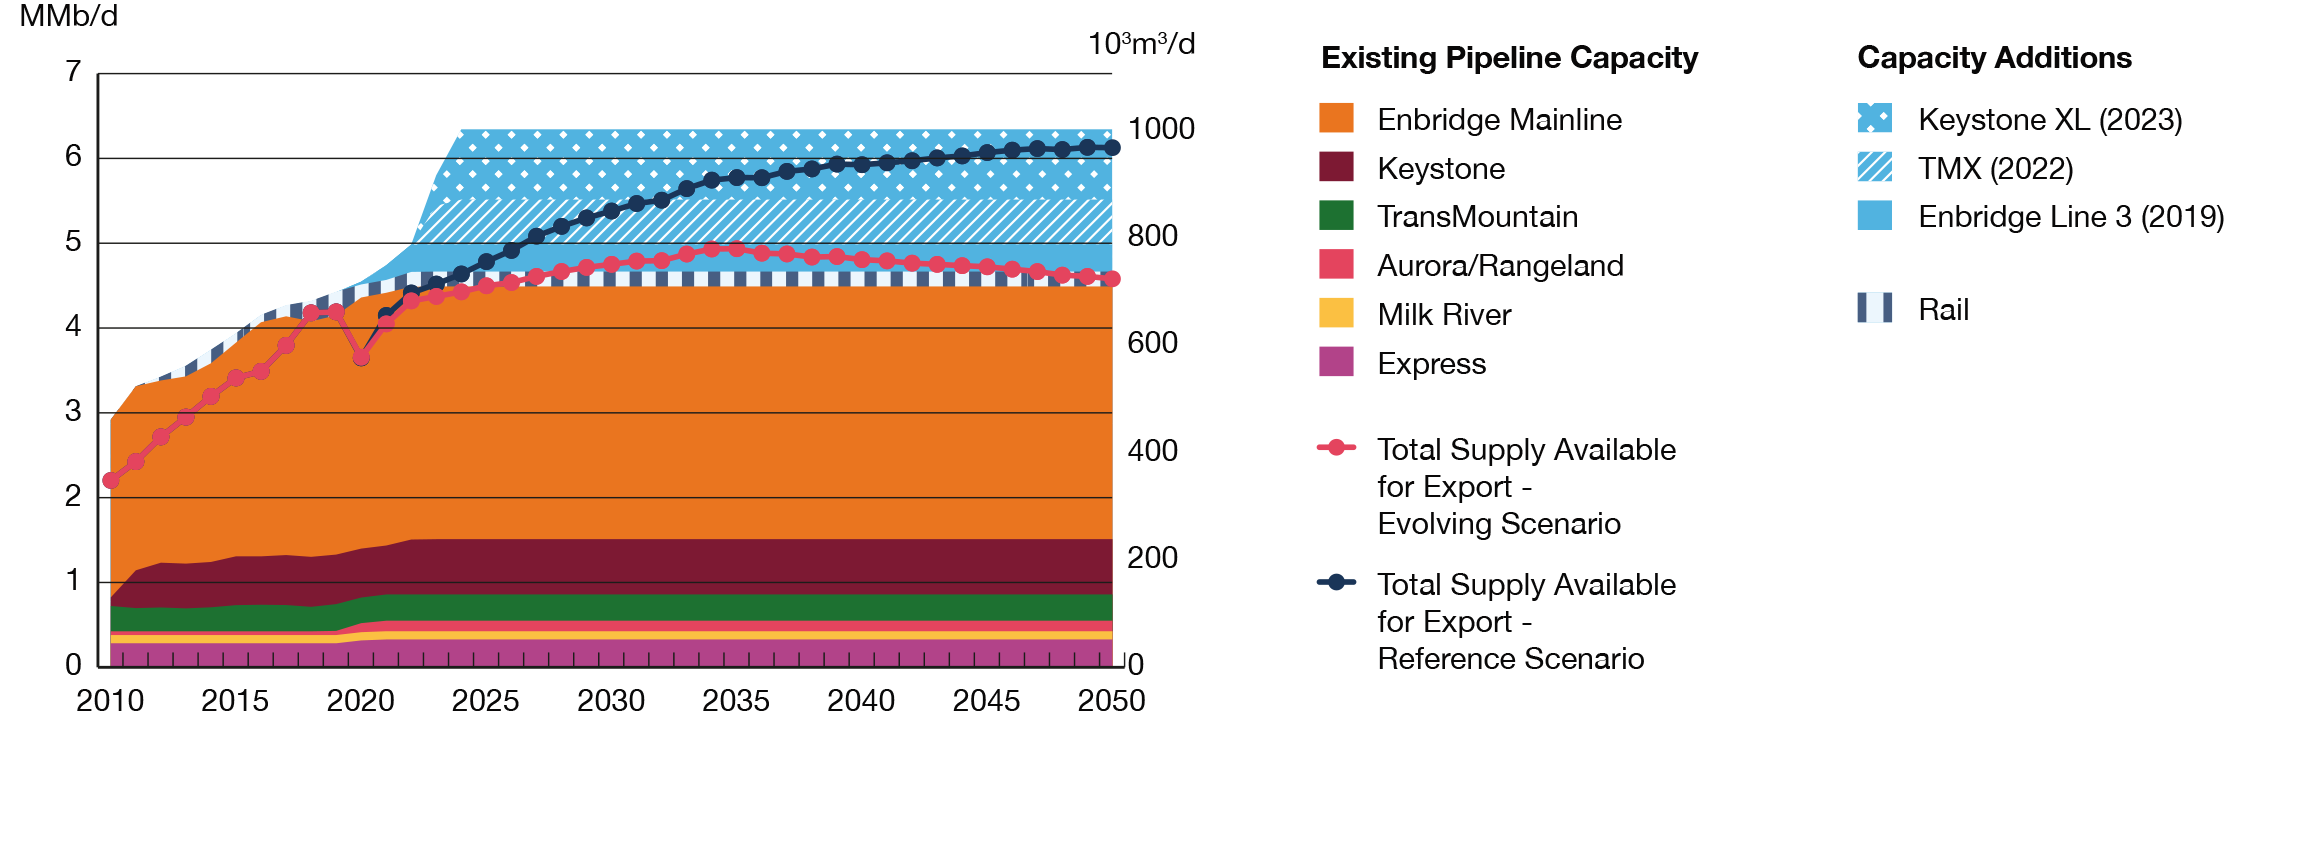 Figure R12 Crude Oil Pipeline Capacity vs. Total Supply Available for Export in the Evolving and Reference Scenarios